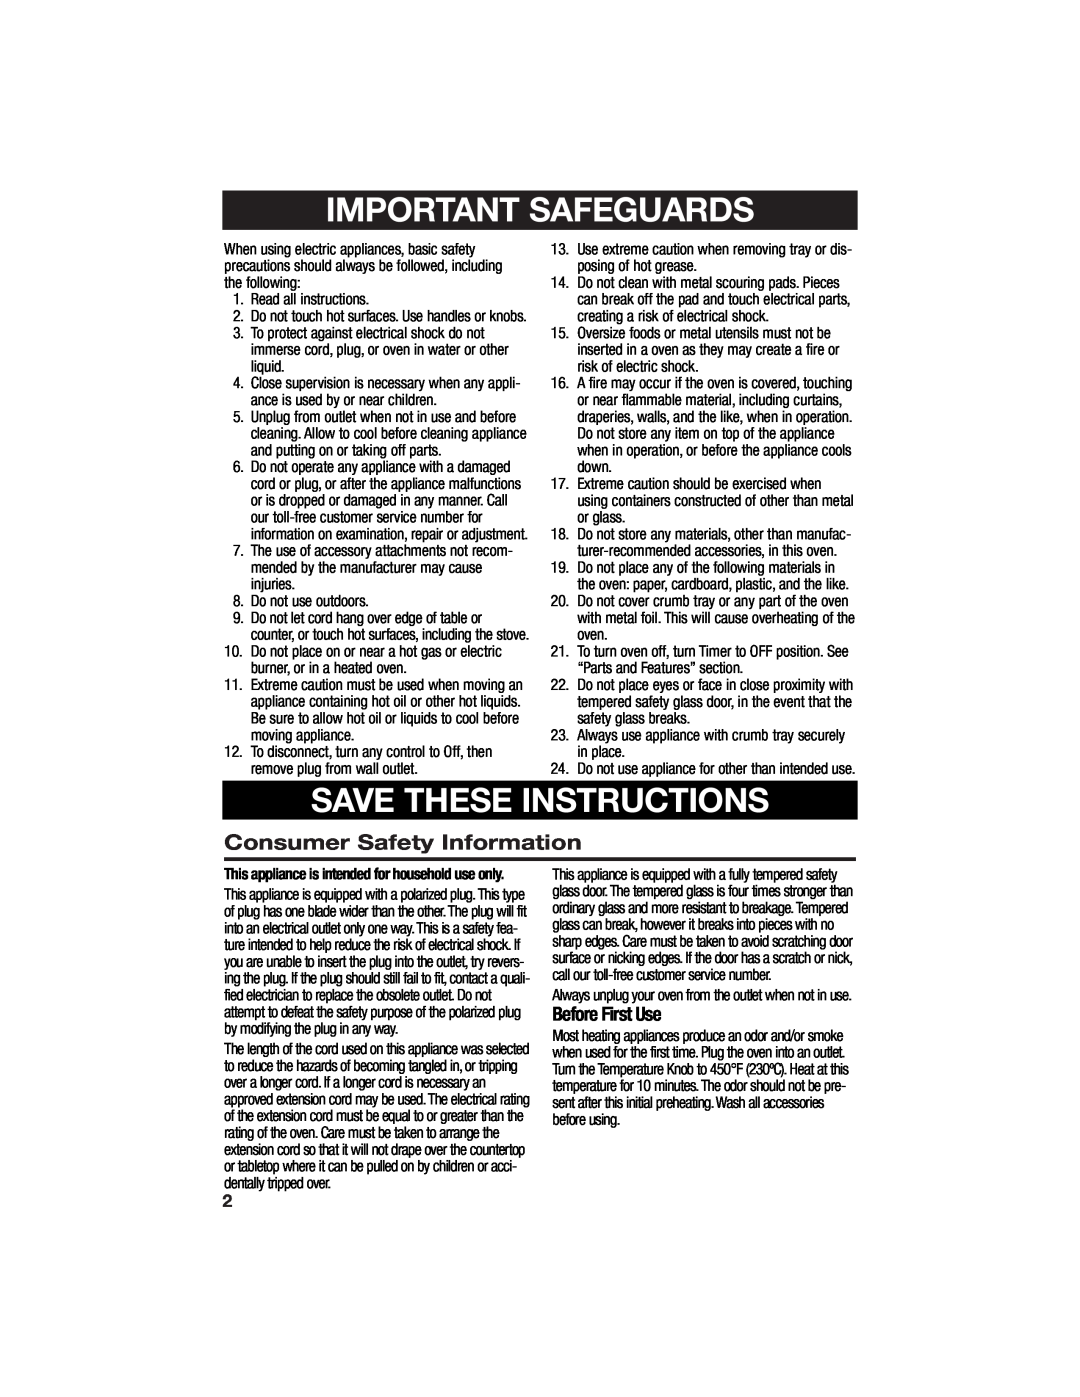 Hamilton Beach Countertop Oven with Convection manual Consumer Safety Information, Before First Use, Important Safeguards 